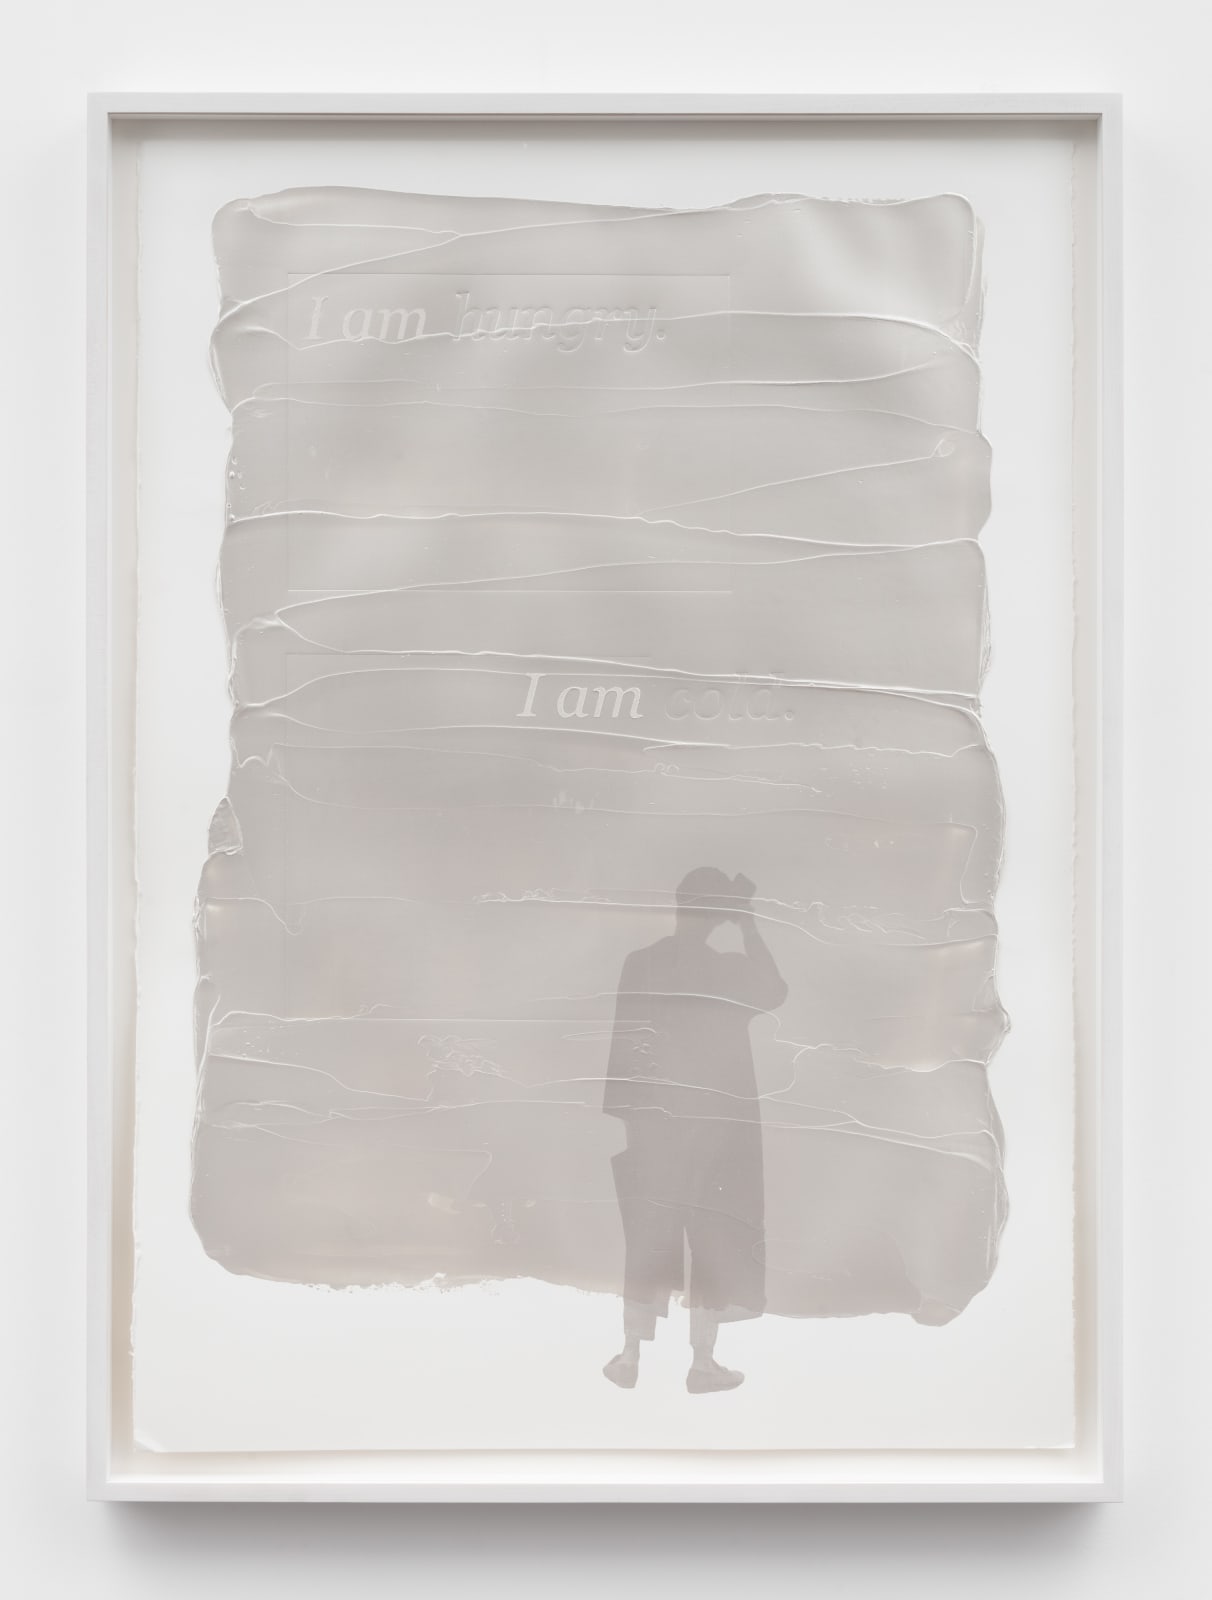 Andrea Geyer, Shadow Box (I am hungry. I am cold.), 2019